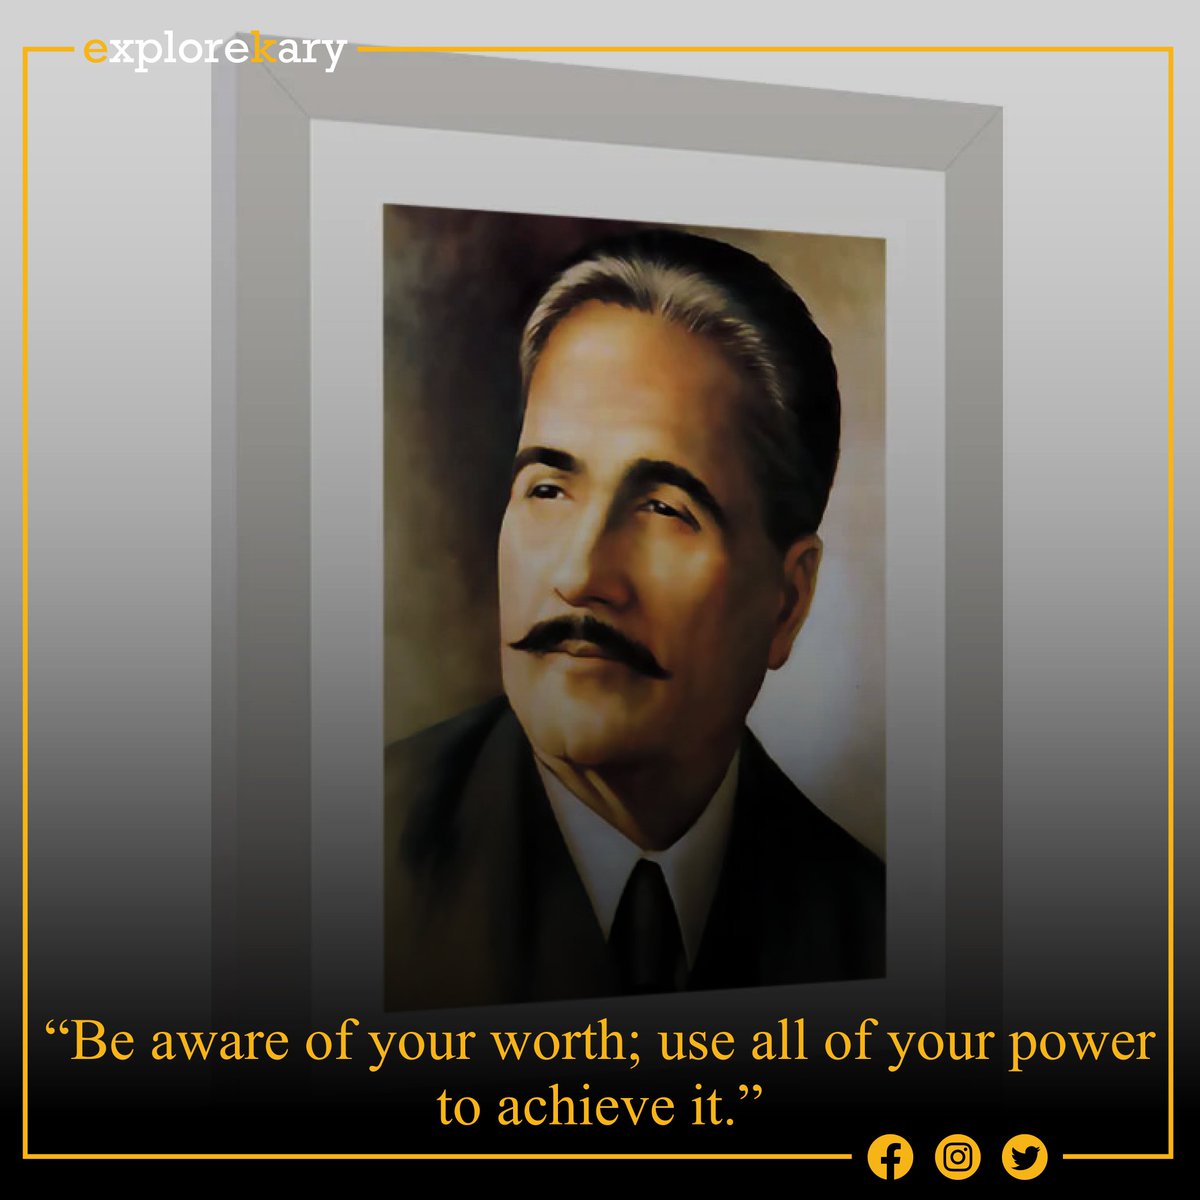 Happy Iqbal Day
Celebrate the poetic symphony of thoughts and the visionary spirit of Allama Iqbal on this special day

#IqbalDayInspiration #VersesOfWisdom #SoulfulVerses #VisionaryPoet #explorekary